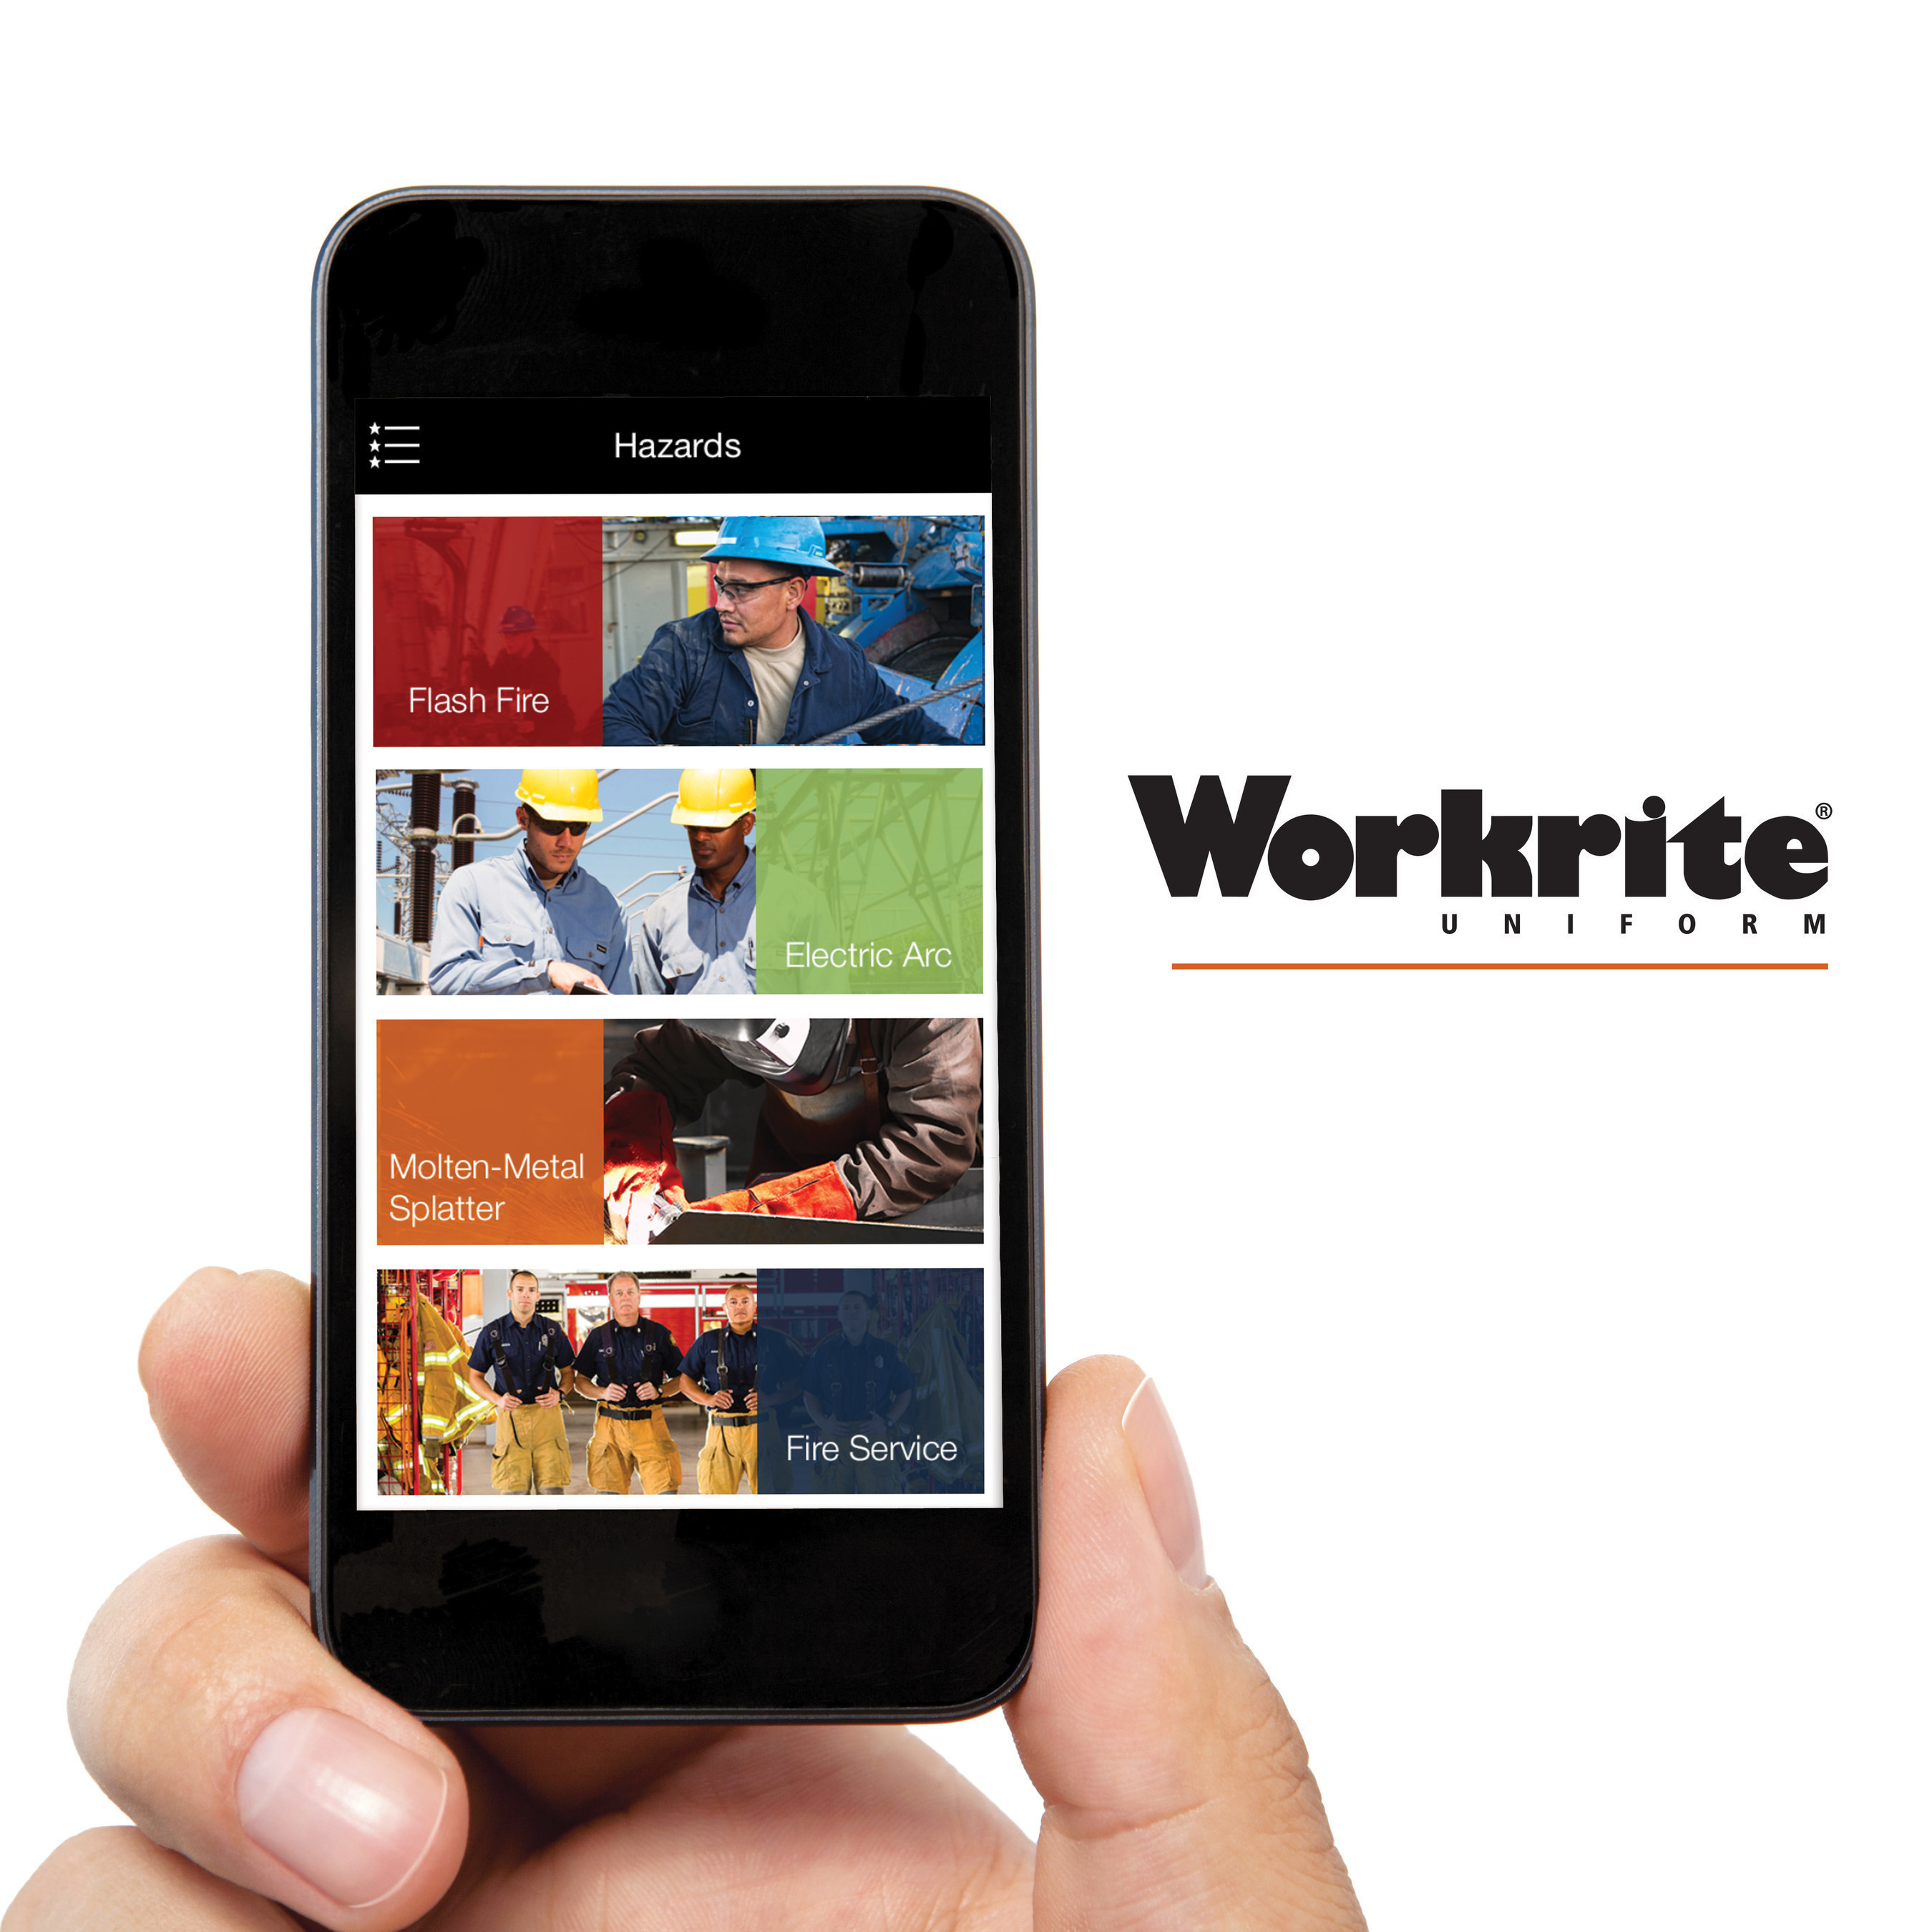 Workrite Uniform's "FR Clothing" app showcases information on each of the major hazards in flame-resistant apparel industry.